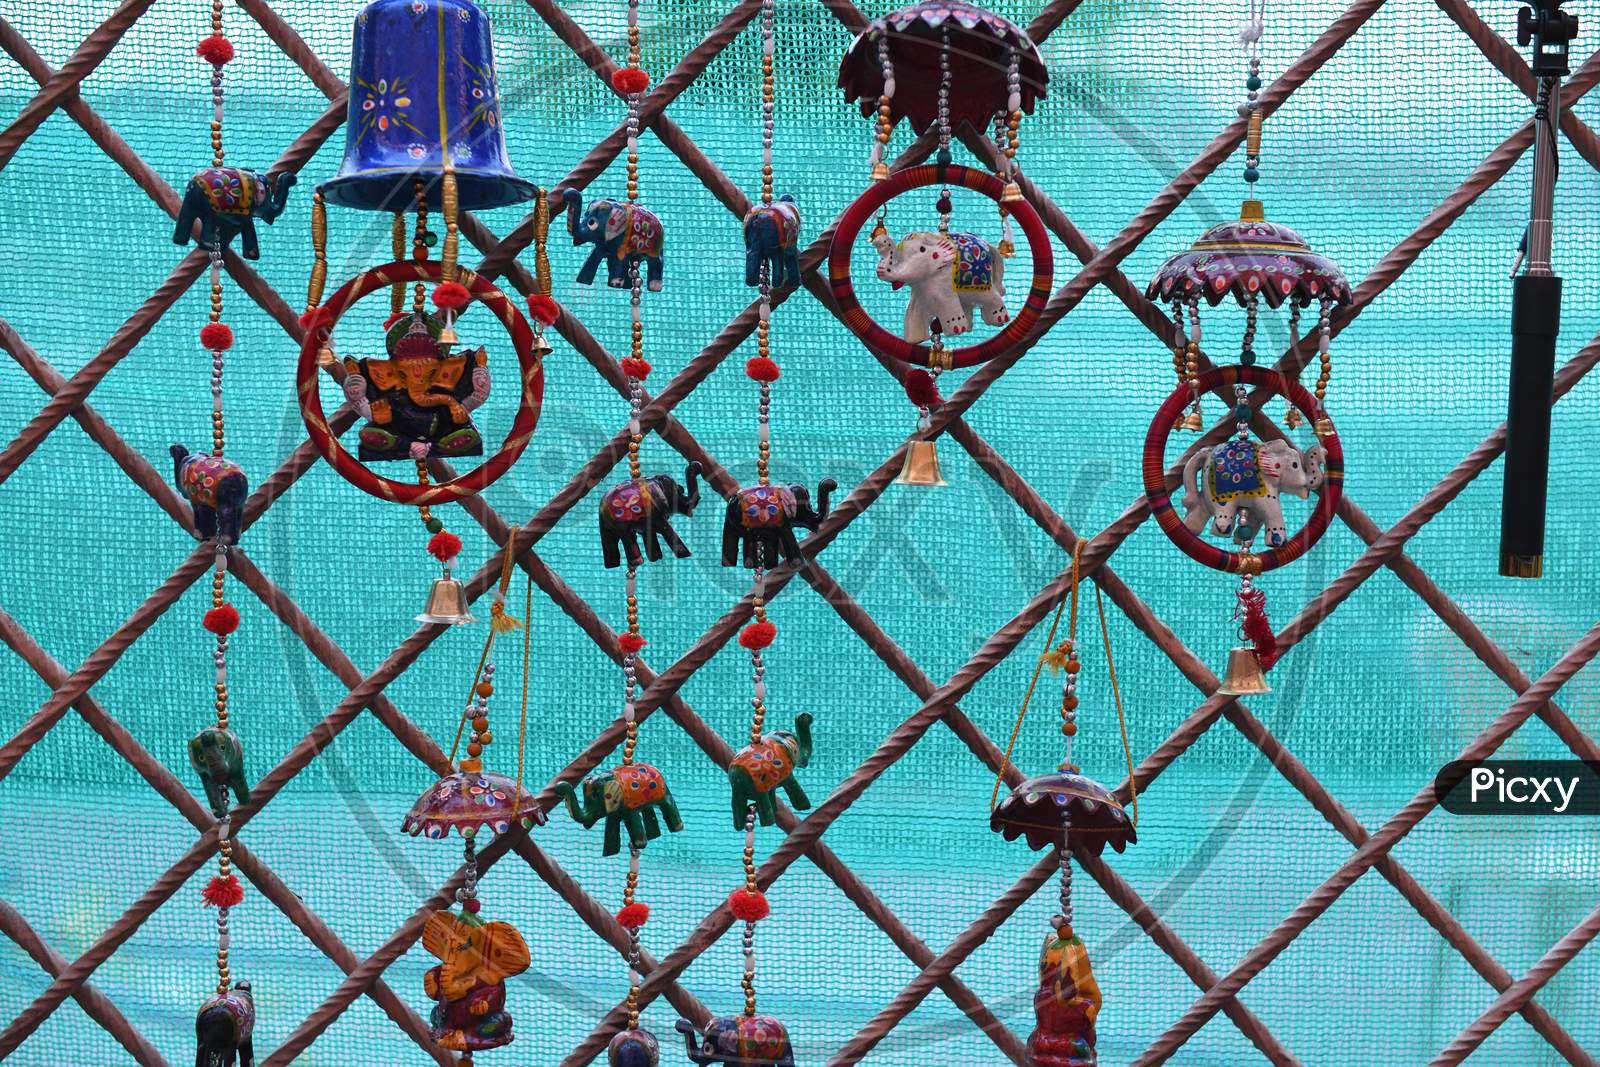 Wall hangers Selling At a Road Side Stall